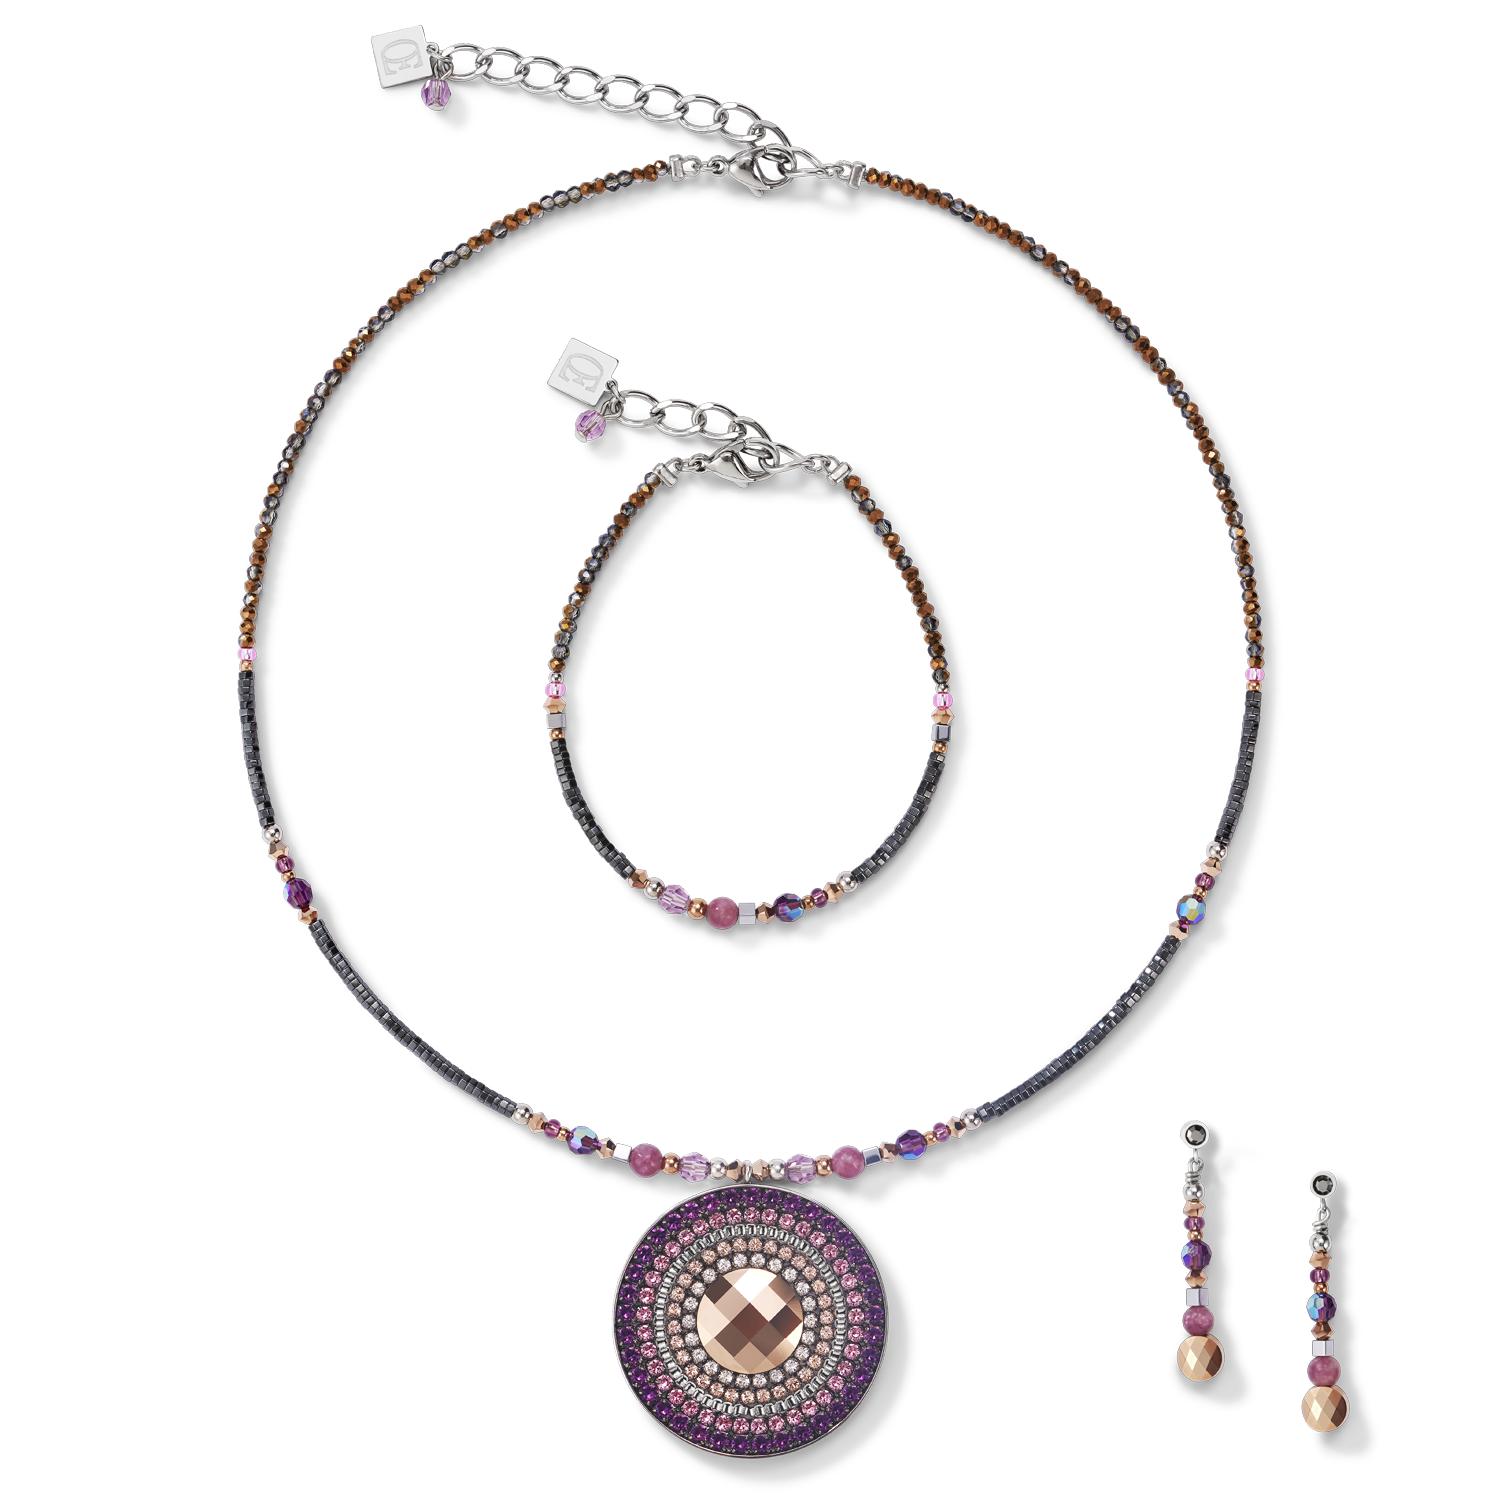 Necklace Amulet small Crystals & lepidolite amethyste